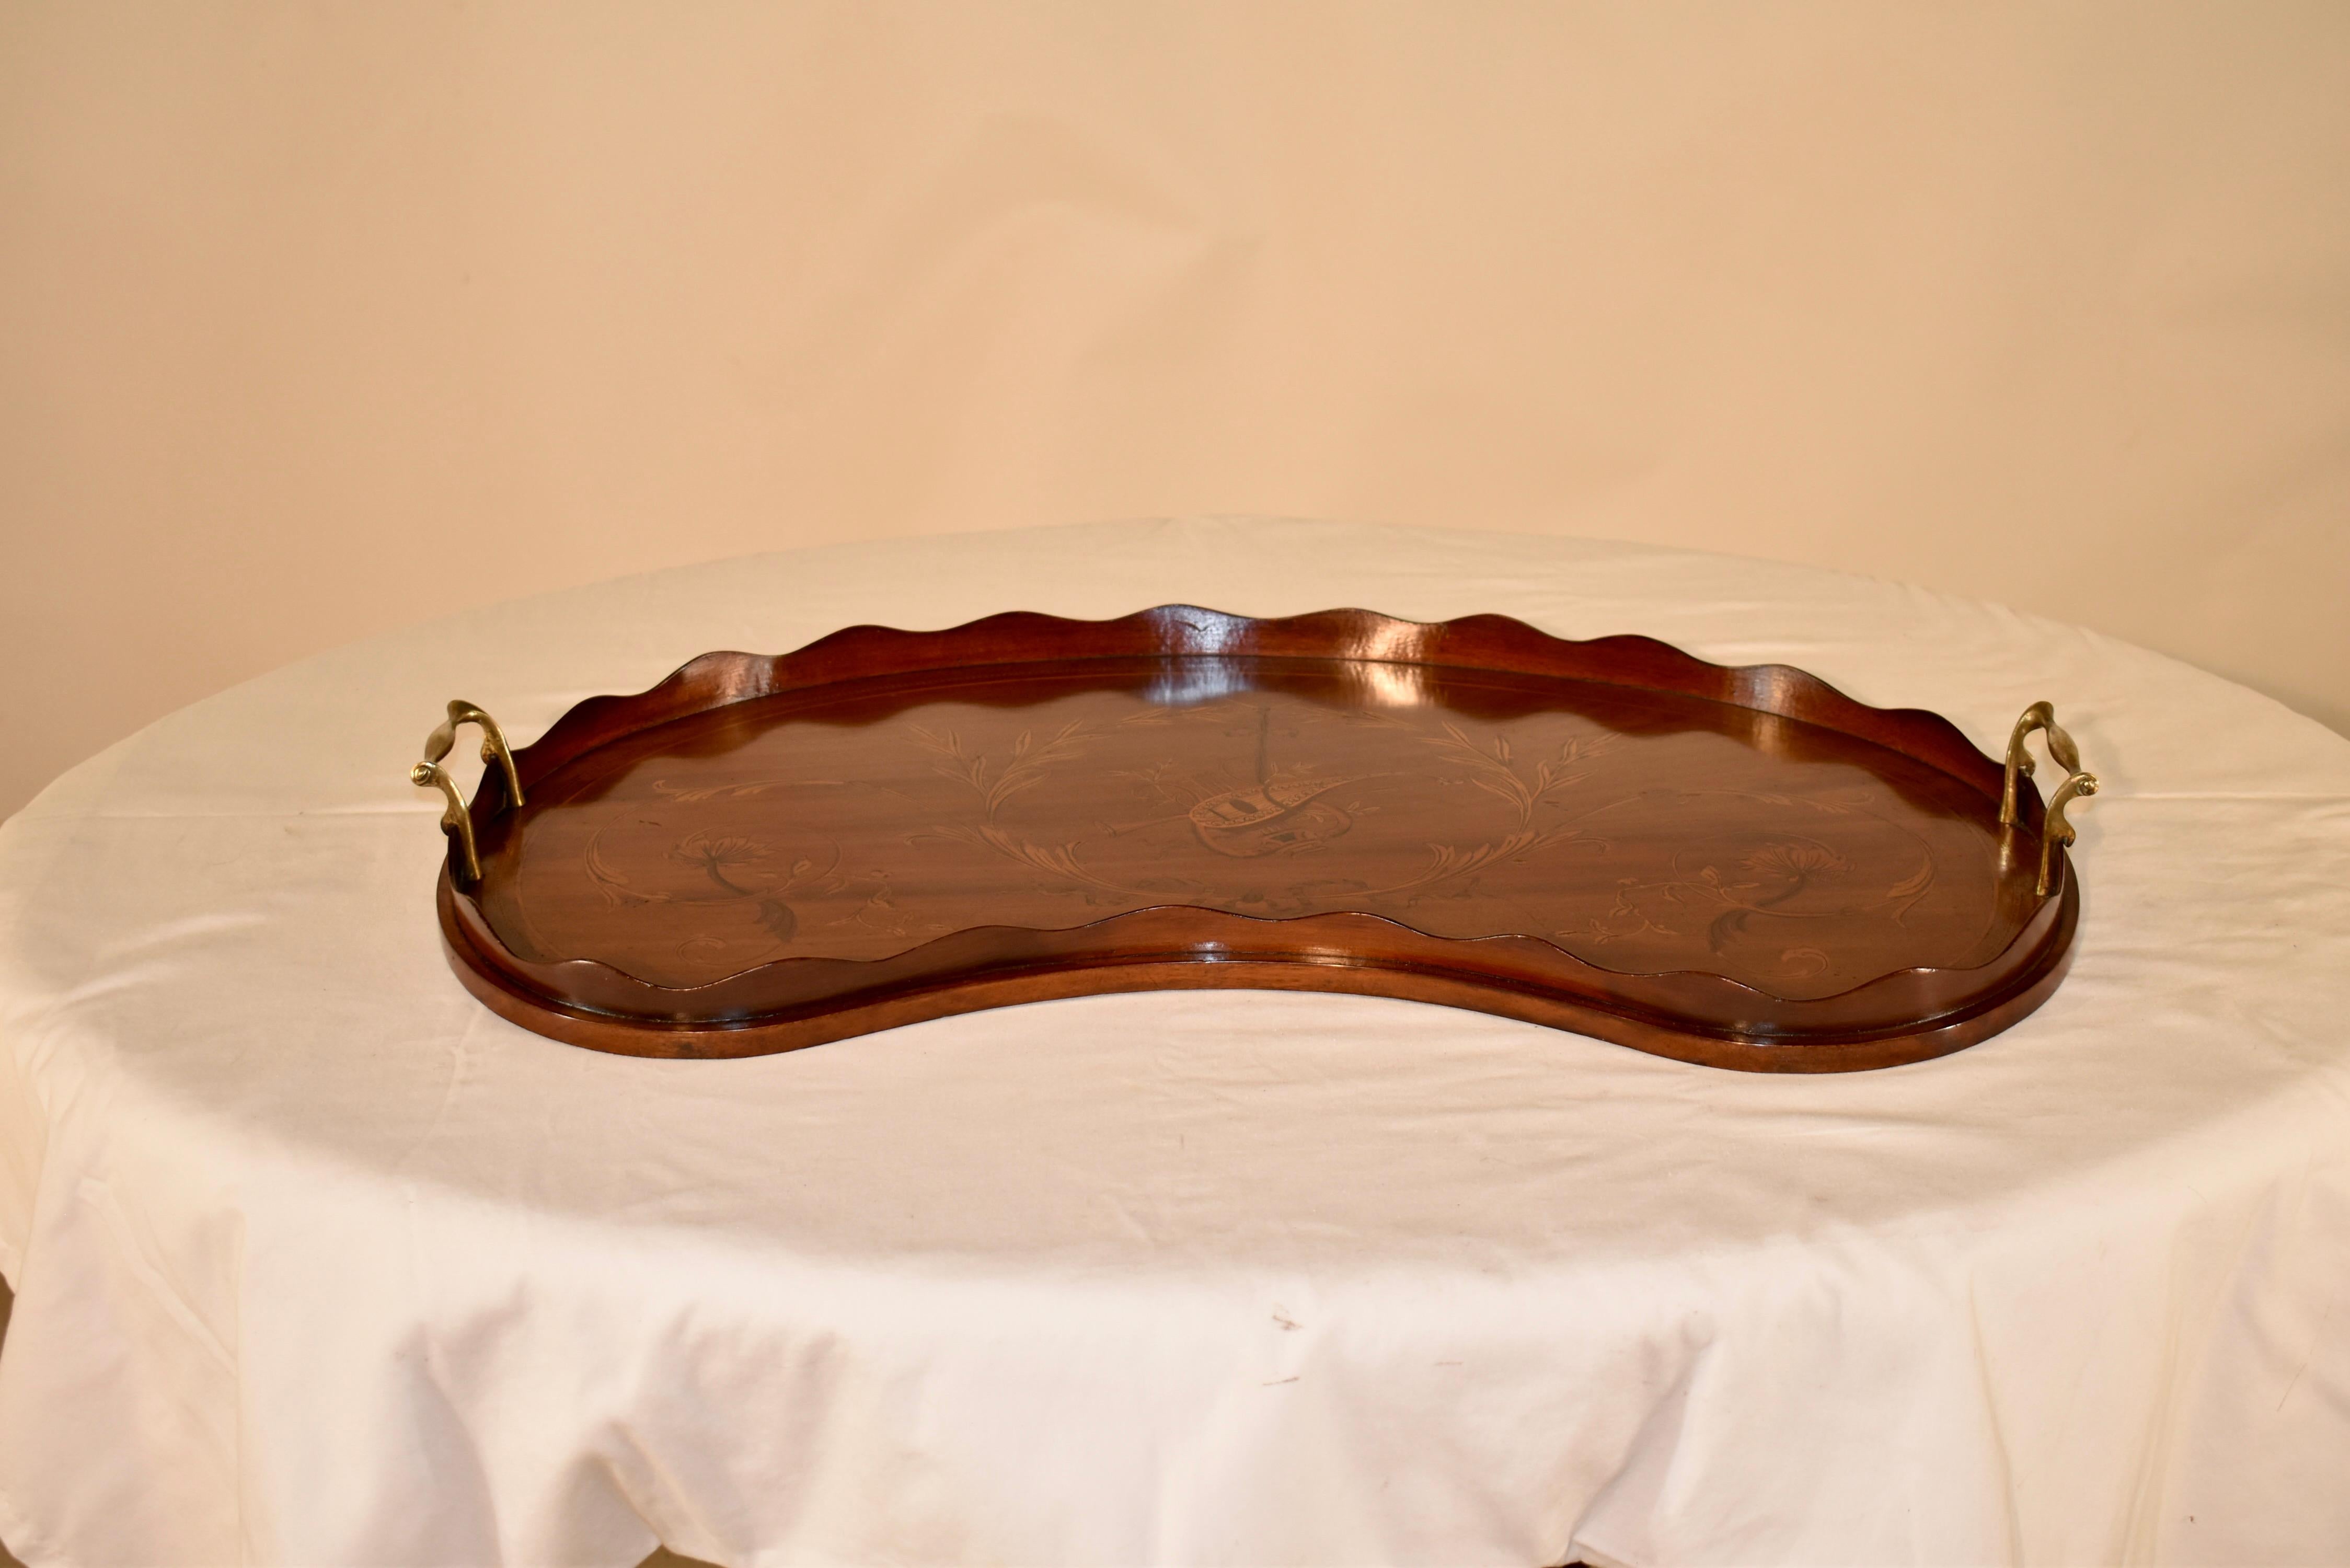 19th Century wonderful quality Georgian mahogany tray with a scalloped gallery surrounding a beautifully inlaid central music design with crossed instruments and surrounded by wonderfully inlaid leaves, vines and bell flowers. Flanked on either end